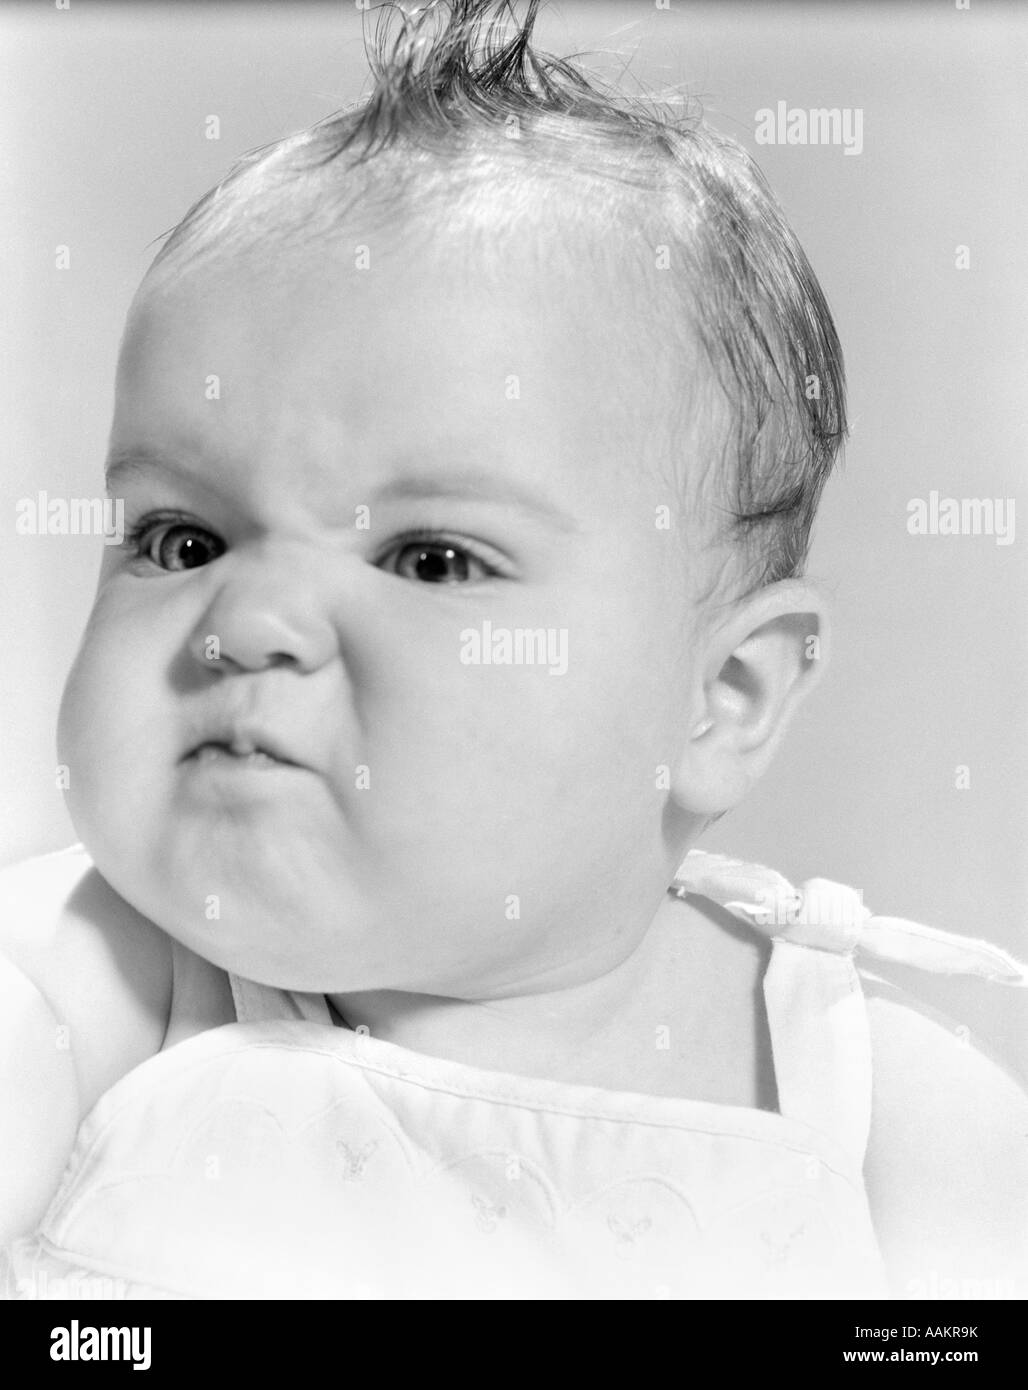 1950s 1960s BABY FACE EXPRESSION ANGRY SAD RETR0 Stock Photo